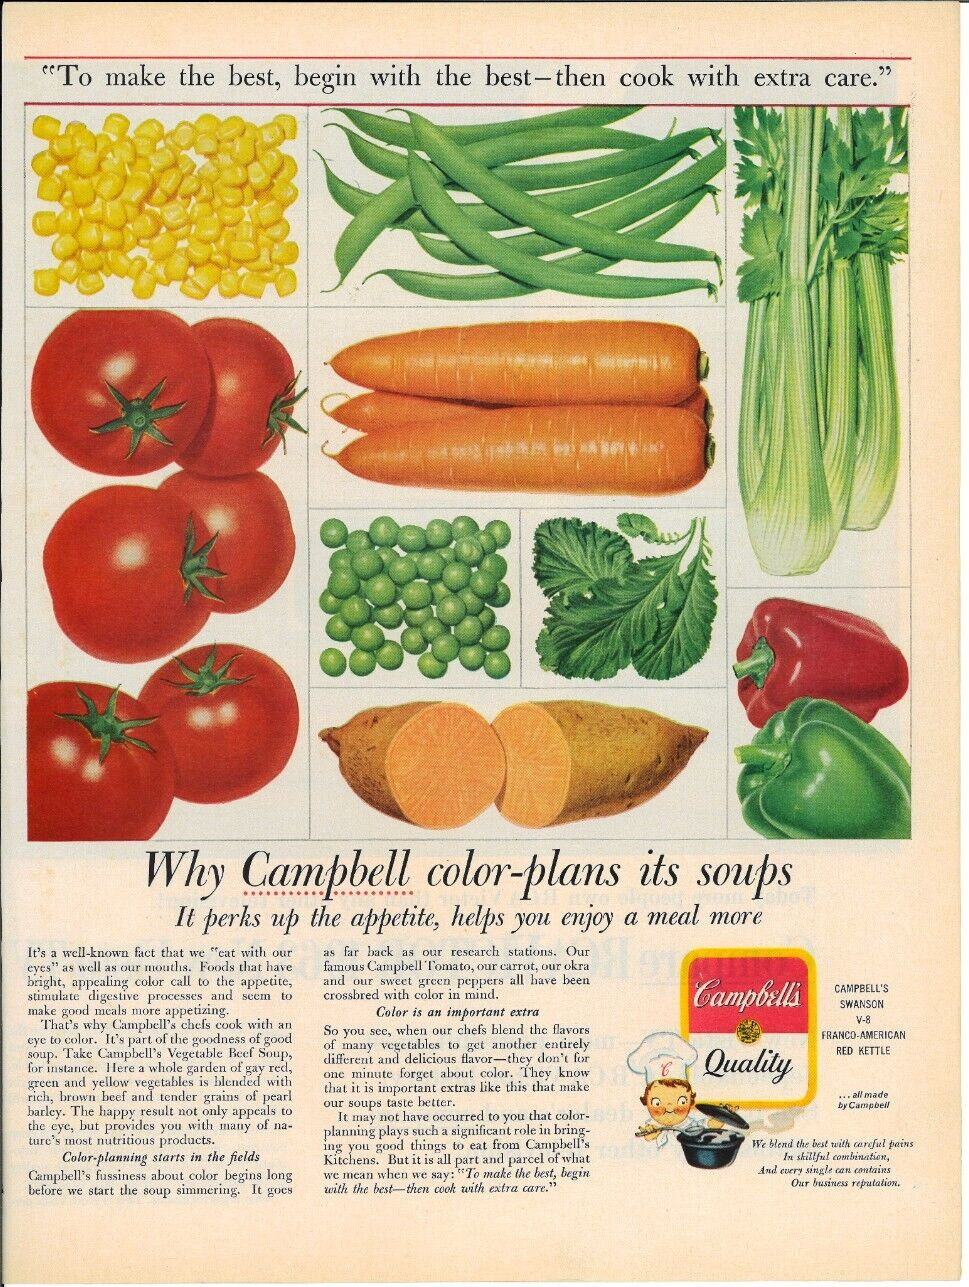 1962 CAMPBELL'S QUALITY SOUP Vegetable Color Food Vintage Print Ad